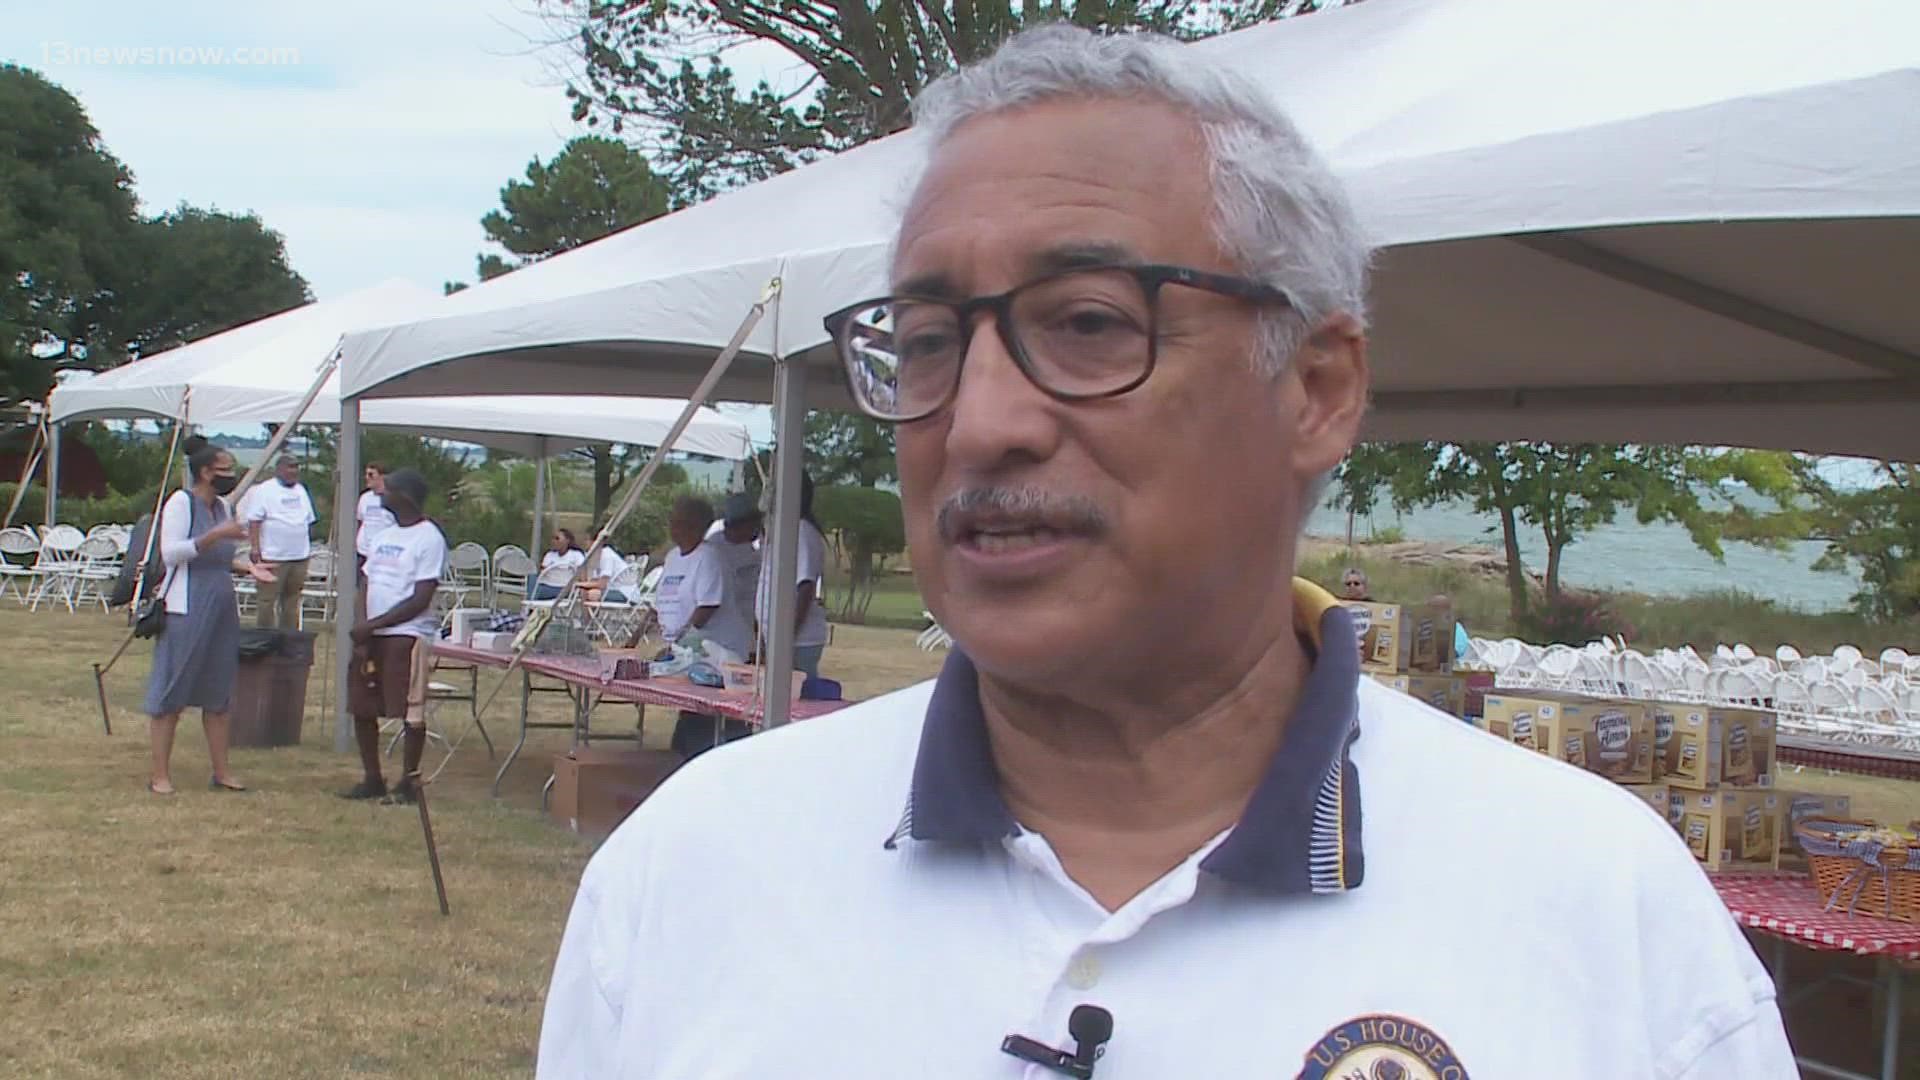 Rep. Bobby Scott said he uses the event to thank volunteers and supporters in the community. It also marks the unofficial kickoff of political campaigning.